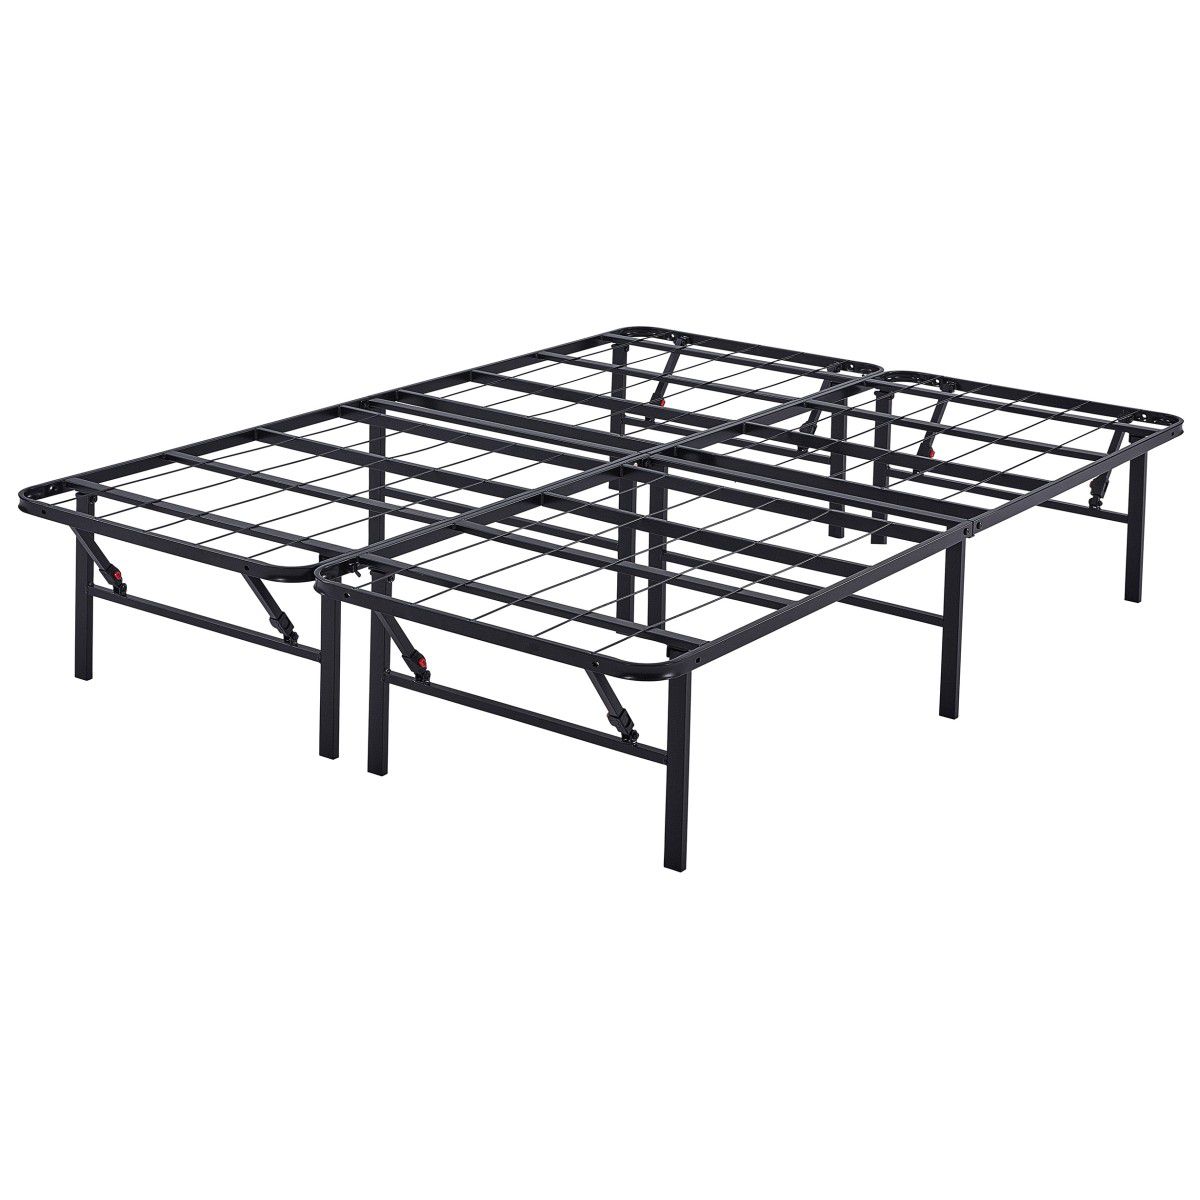 Queen sized bed frame